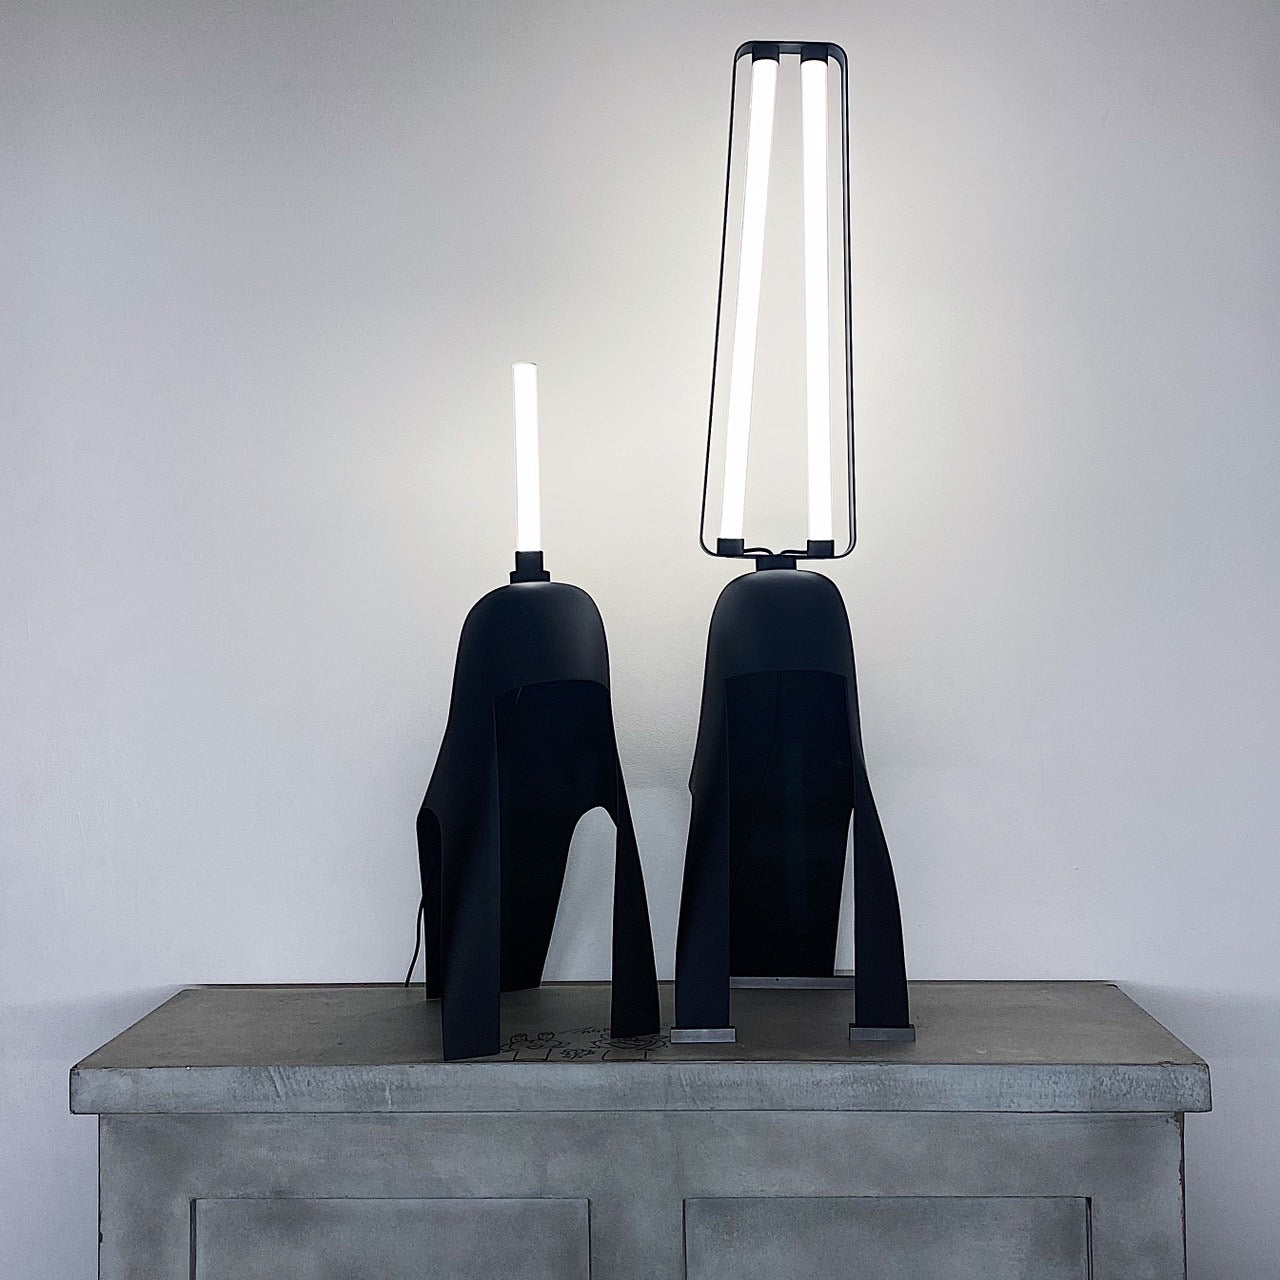 【Rick Owens】<br> "HELMET LAMP" is finally available from the STROBE collection! Check out the new items of "SS23 EDFU"!